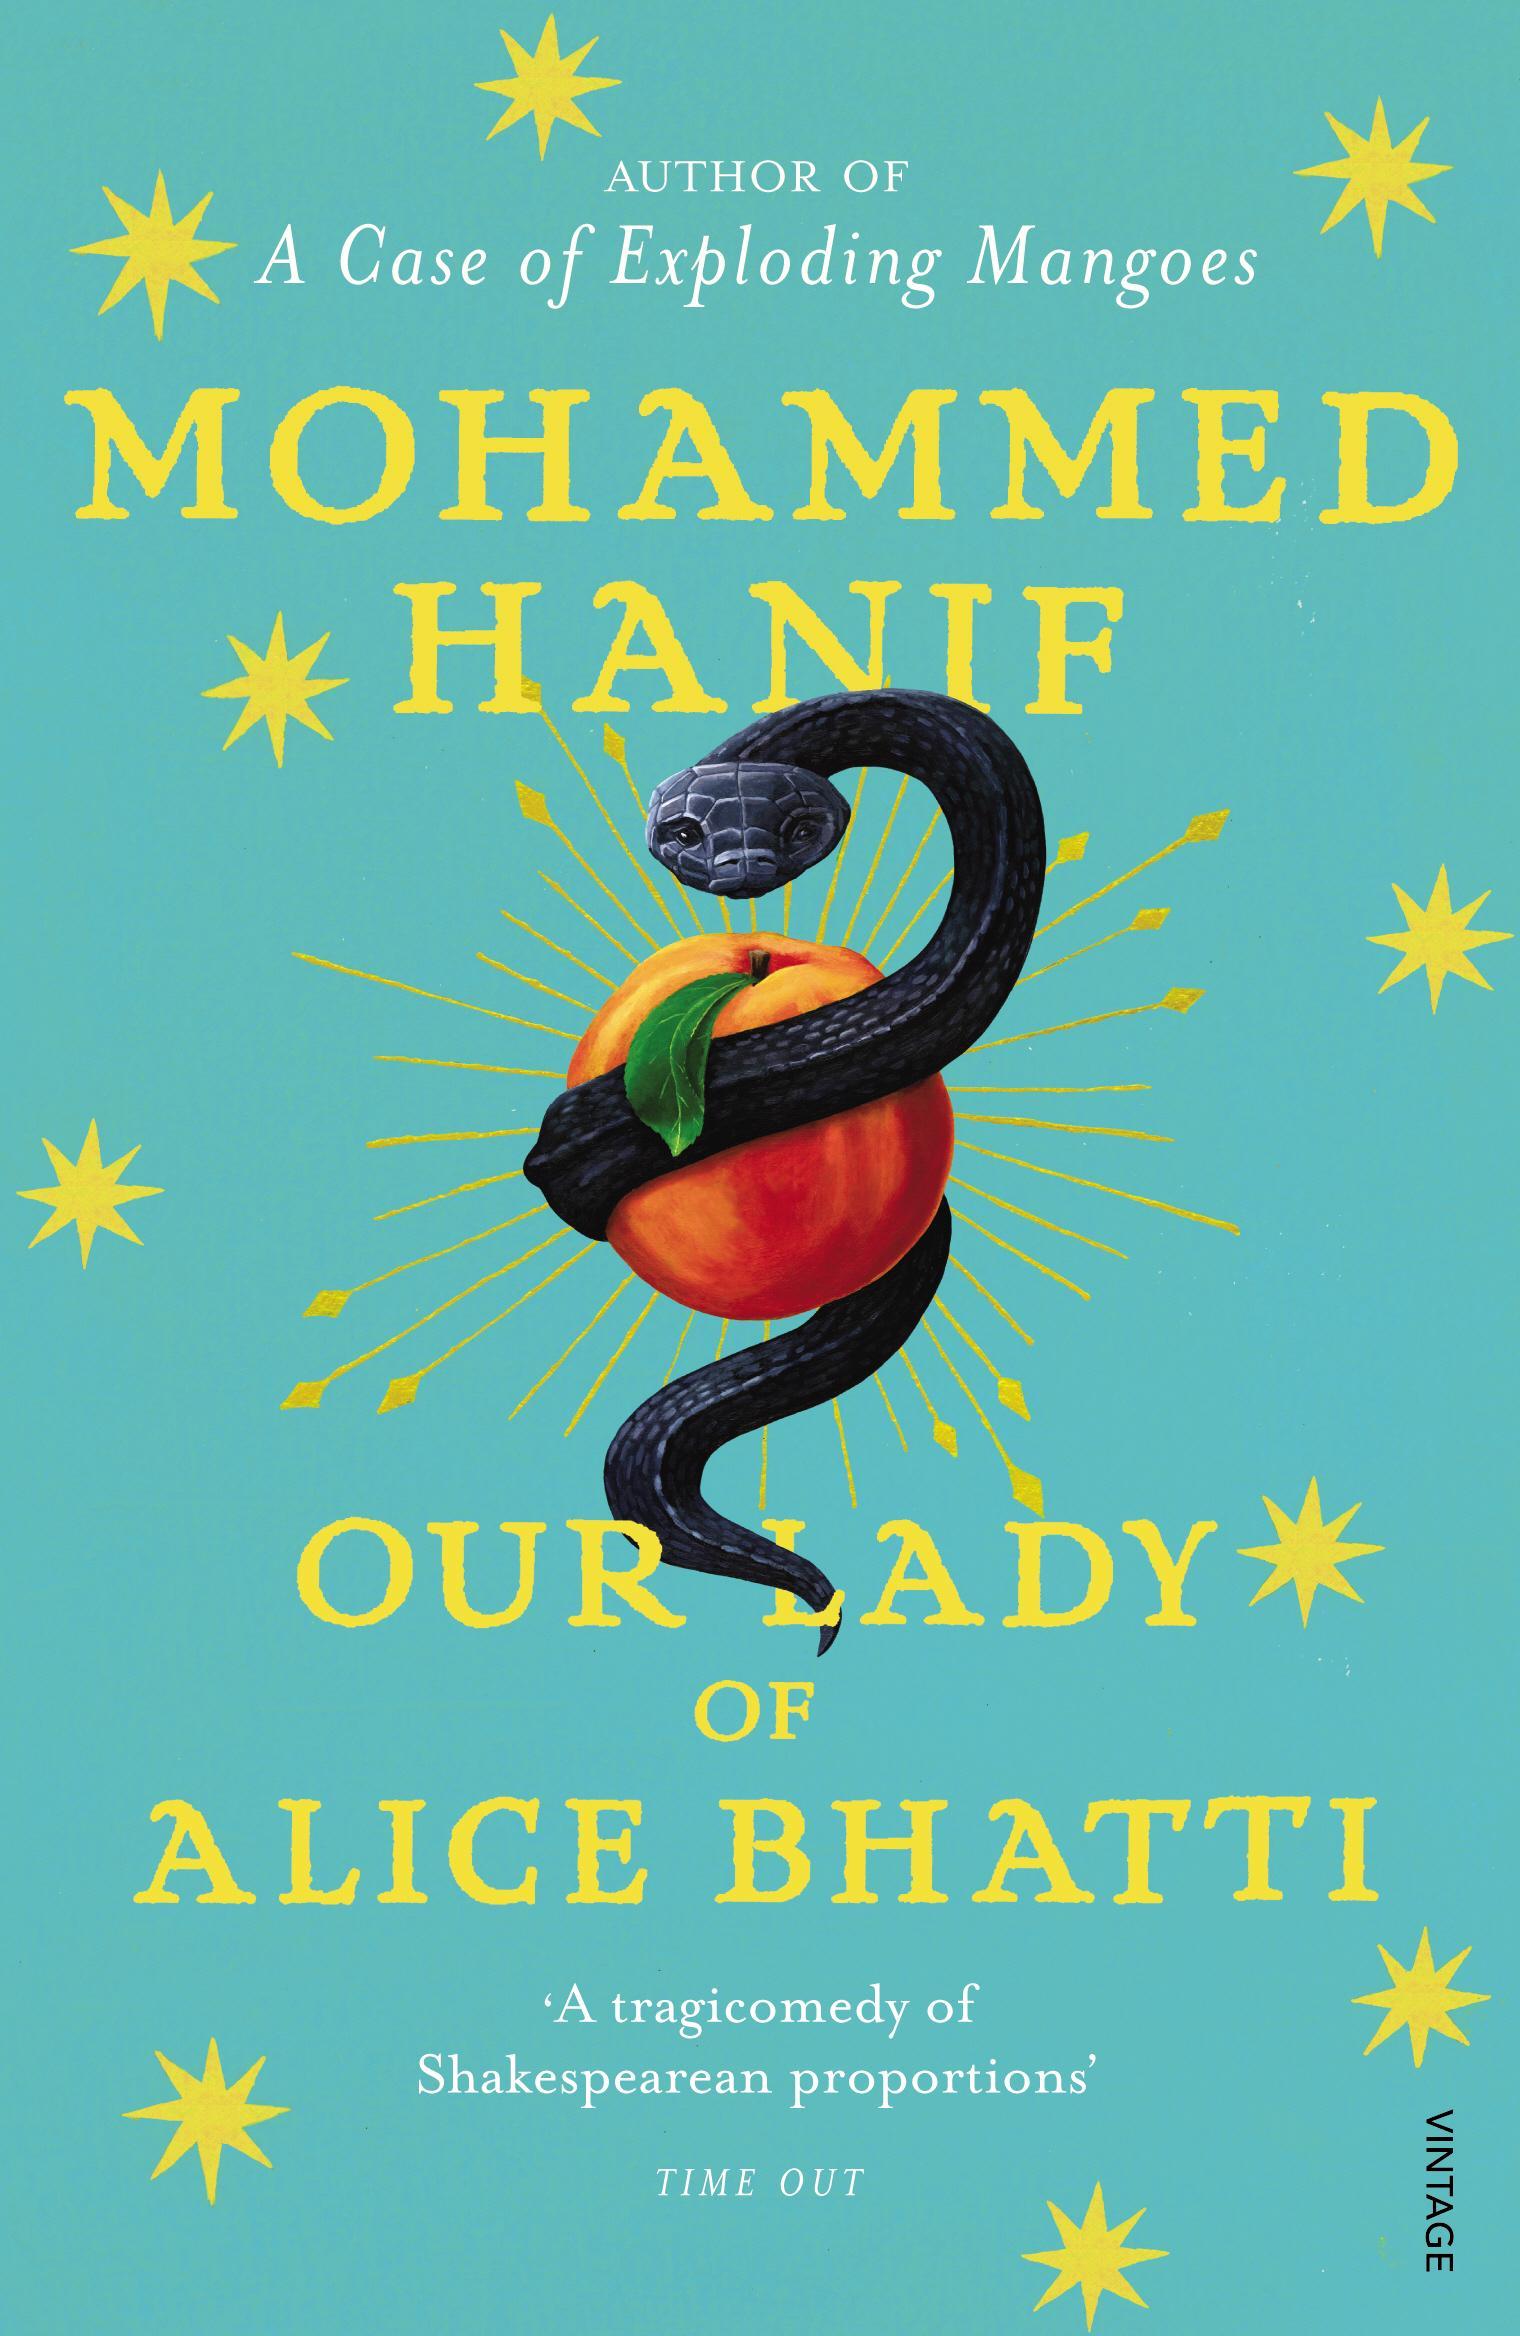 Our Lady of Alice Bhatti - Mohammed Hanif